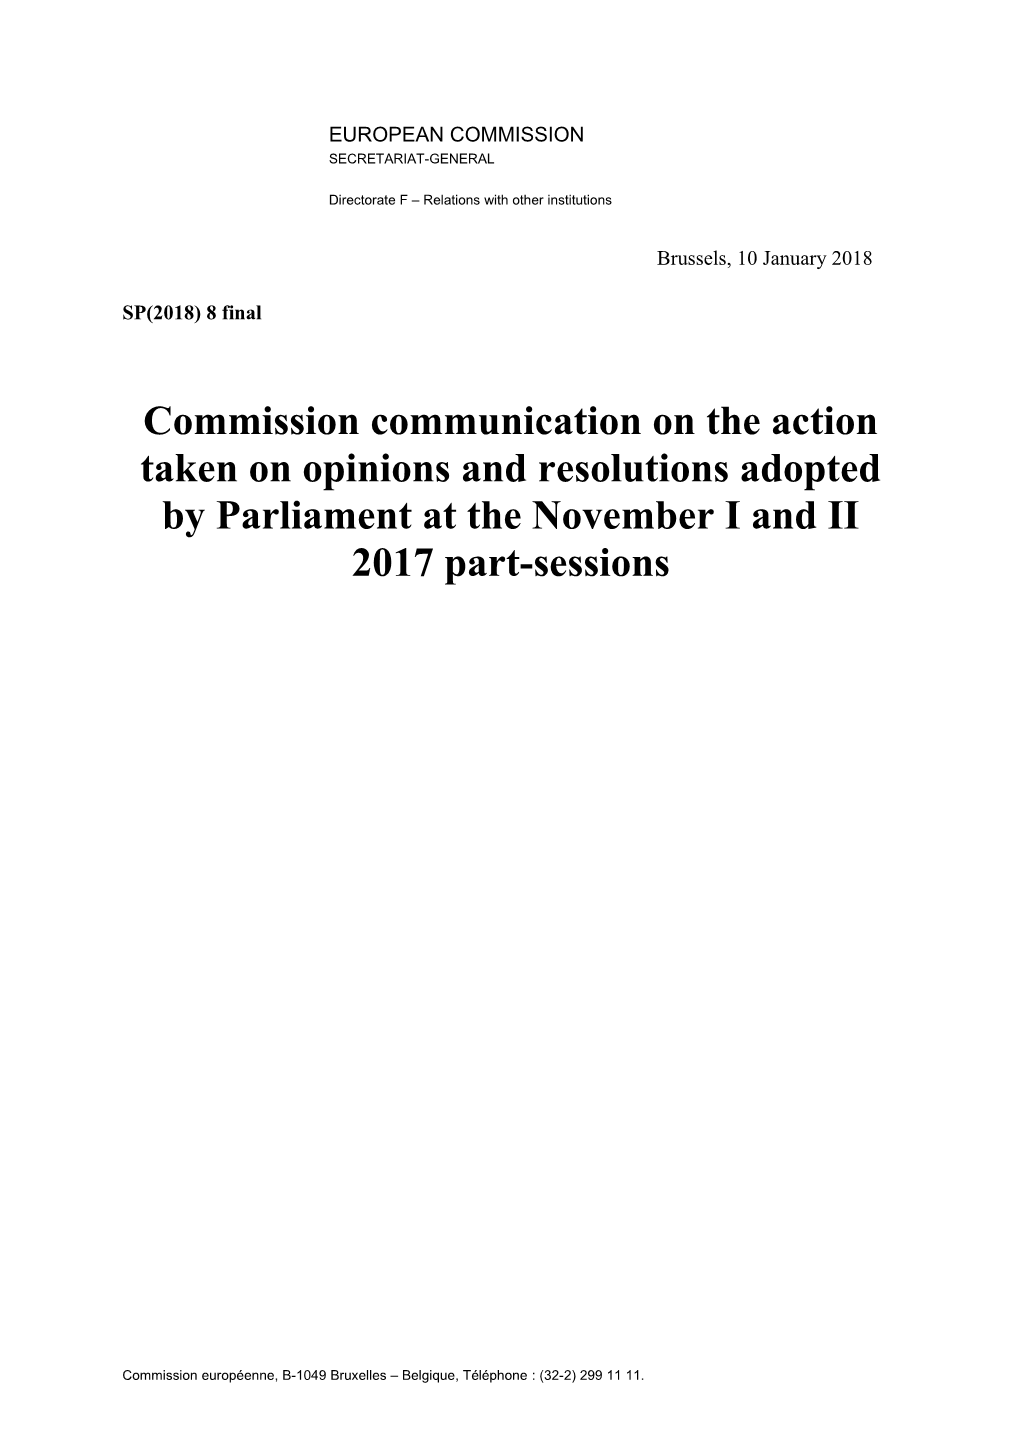 Commission Communication on the Action Taken on Opinions and Resolutions Adopted by Parliament